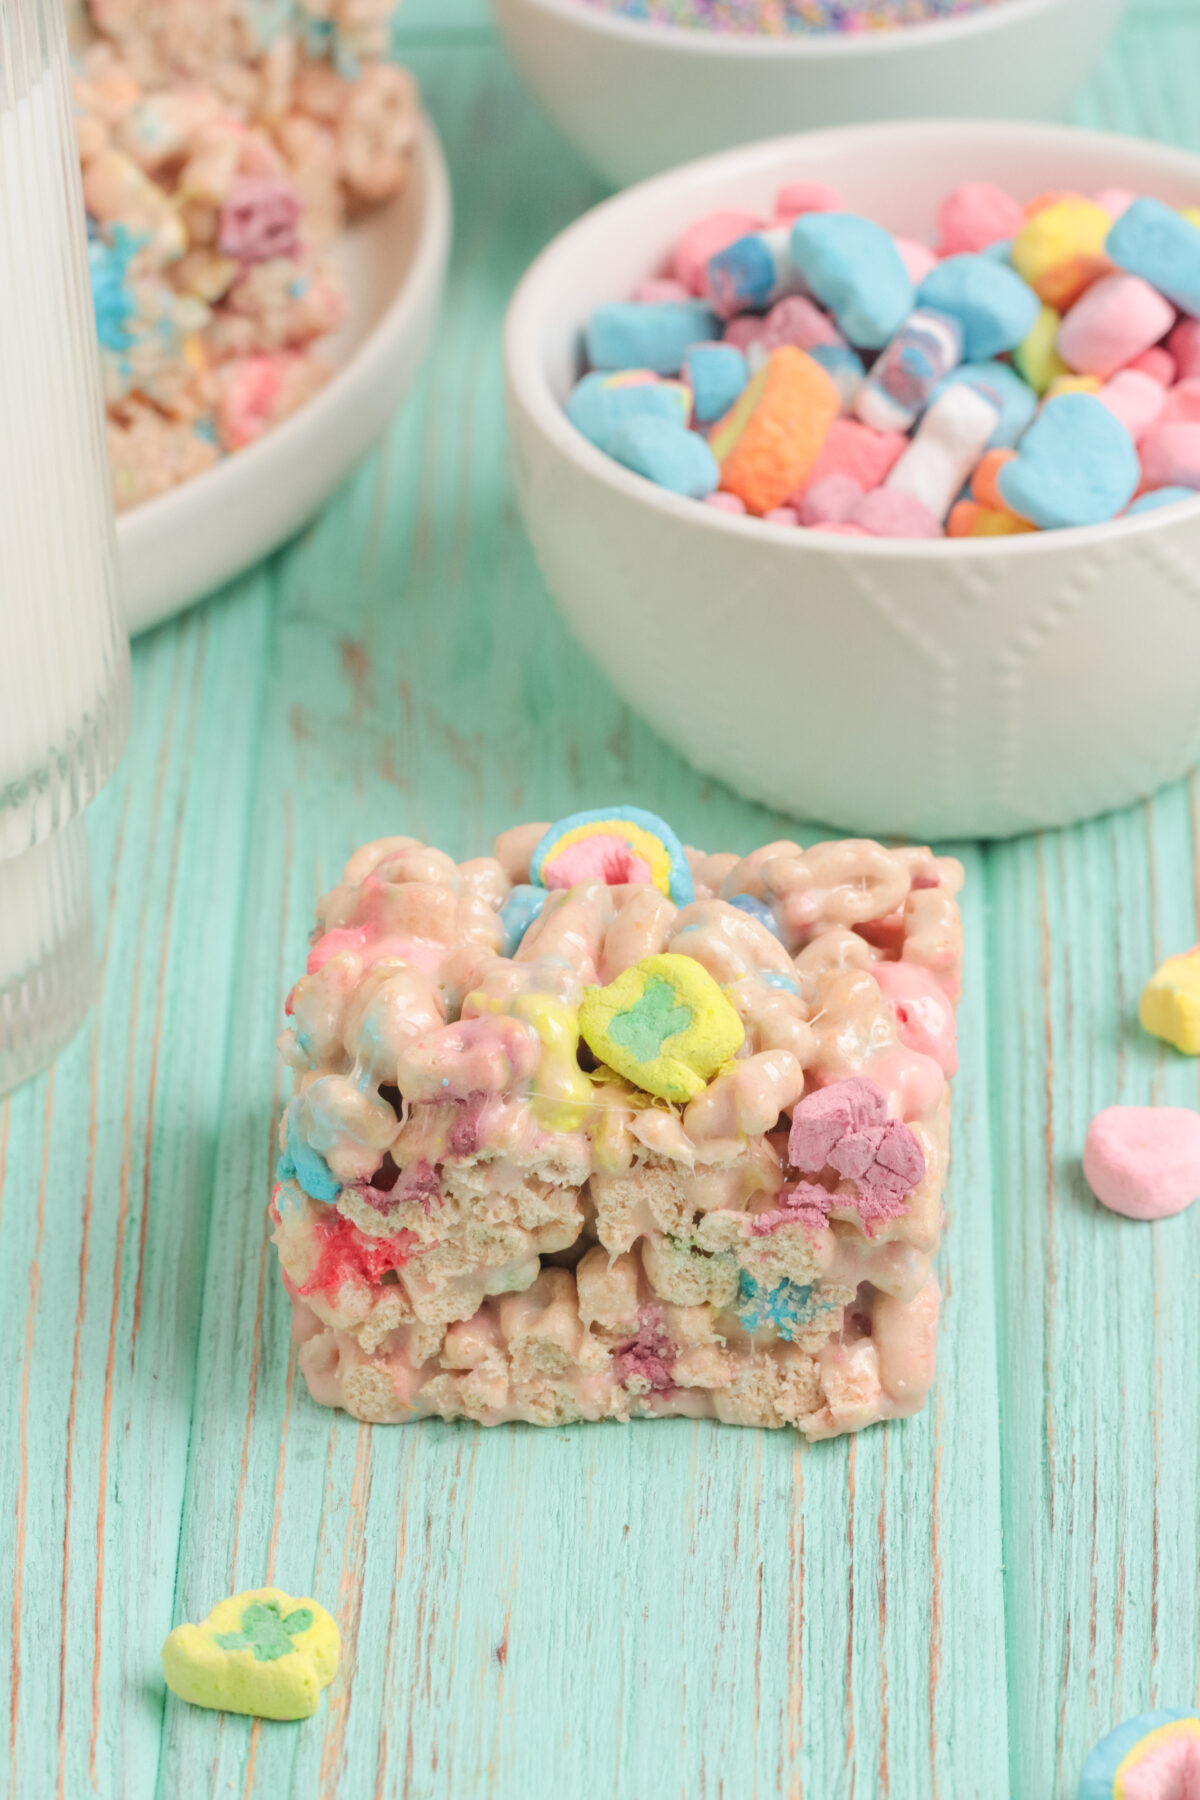 Turn your favourite cereal into a tasty snack with this easy Lucky charms treats recipe. Perfect for St. Patrick’s Day or any day of the year!